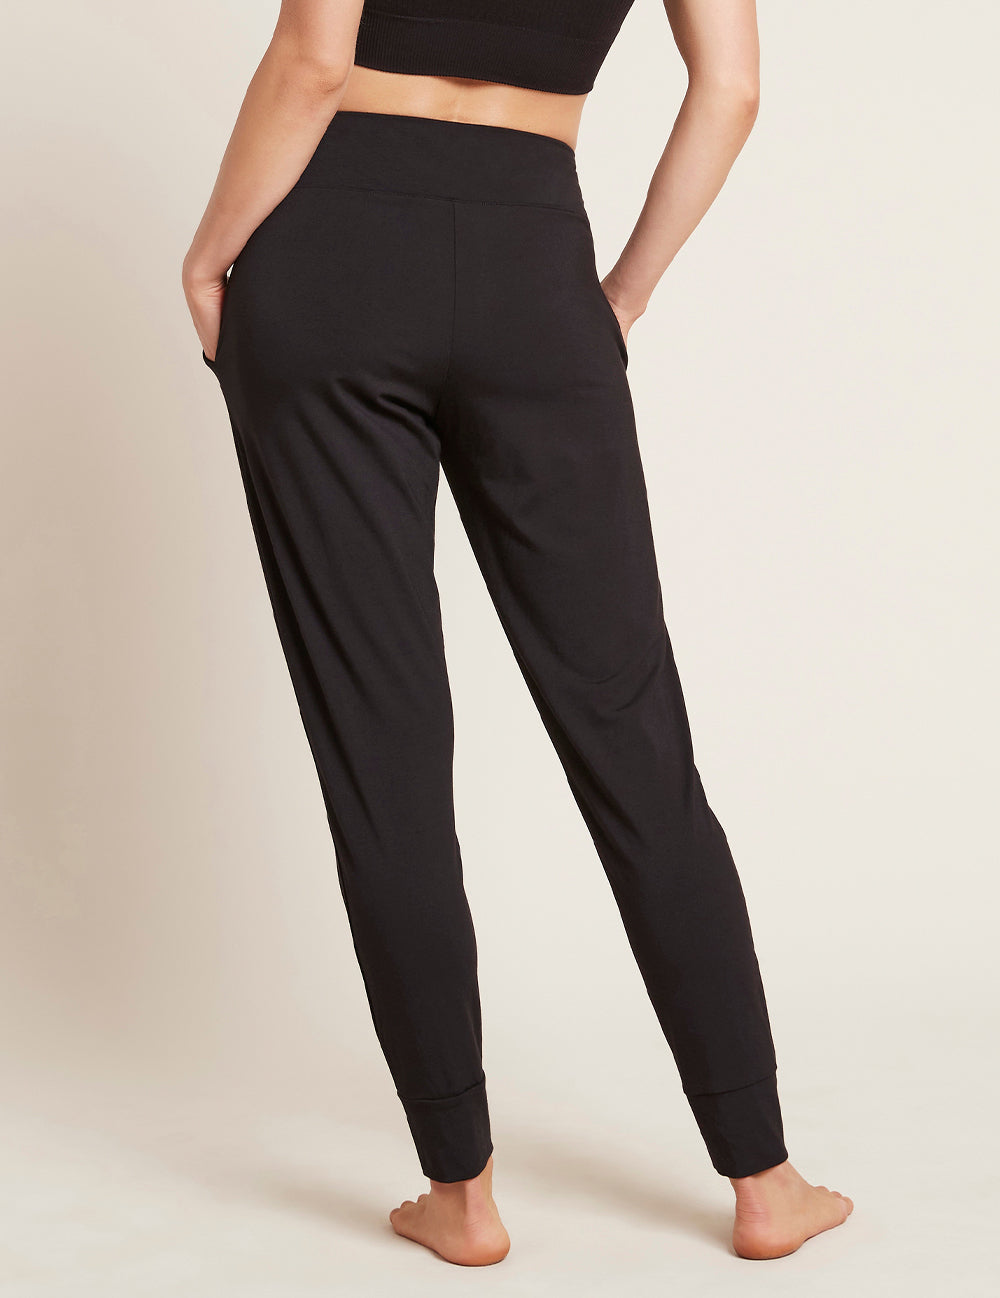 Boody Women's Downtime Lounge Pants in Black Back 2